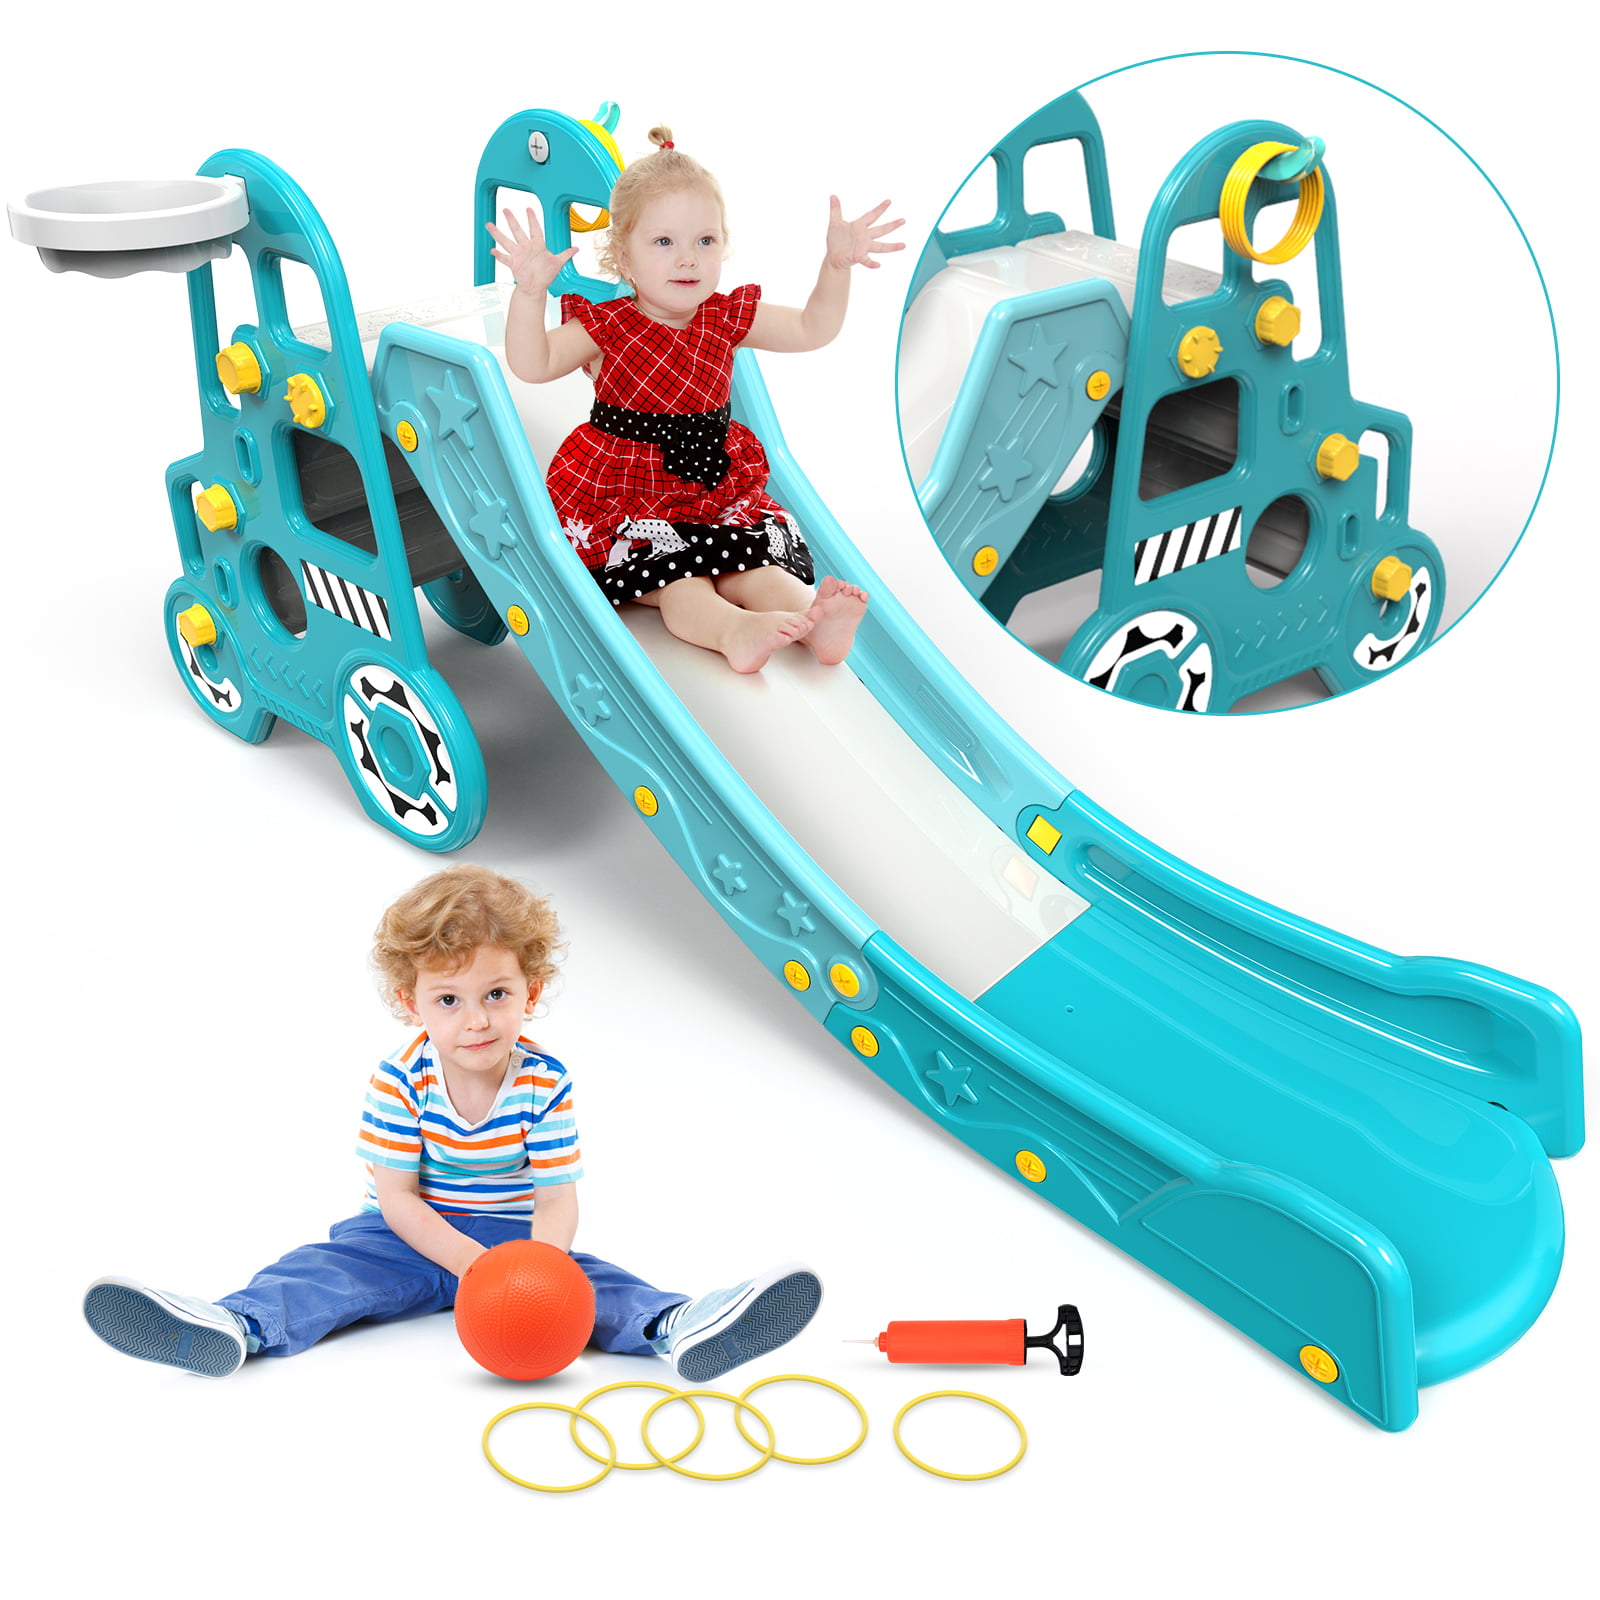 Kids Toddler Slide Activity Play Climber With Musical Dashboard Indoor Outdoor 